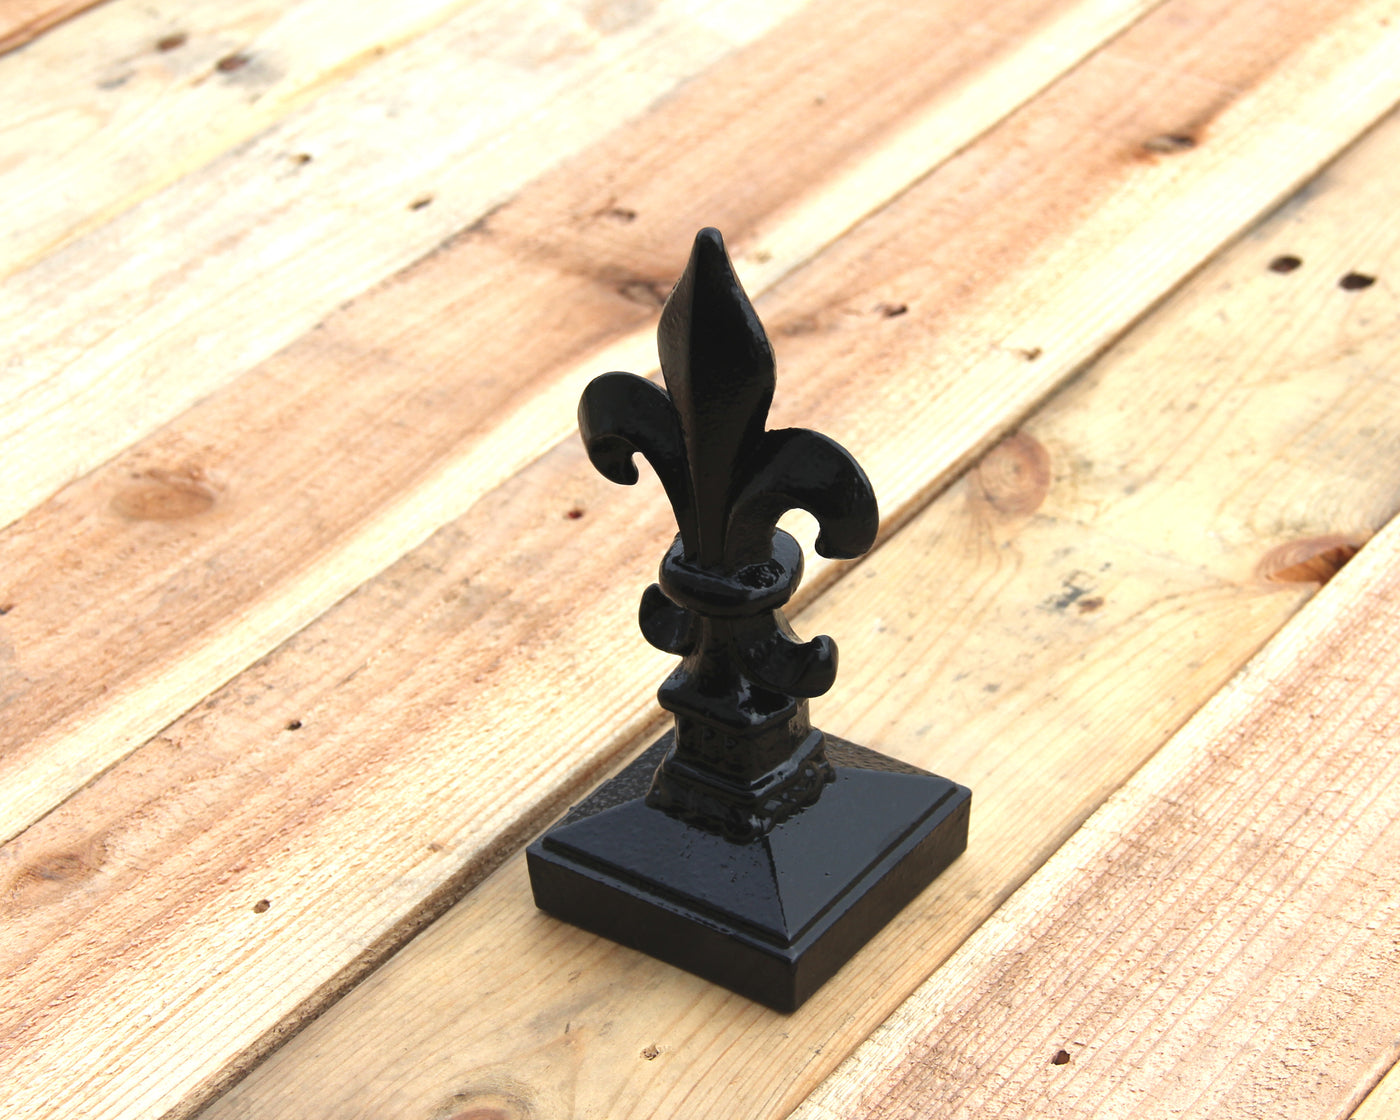 2x2 Fleur-De-Lis Cast Iron Post Cap - Madison Iron and Wood - Post Cap - metal outdoor decor - Steel deocrations - american made products - veteran owned business products - fencing decorations - fencing supplies - custom wall decorations - personalized wall signs - steel - decorative post caps - steel post caps - metal post caps - brackets - structural brackets - home improvement - easter - easter decorations - easter gift - easter yard decor